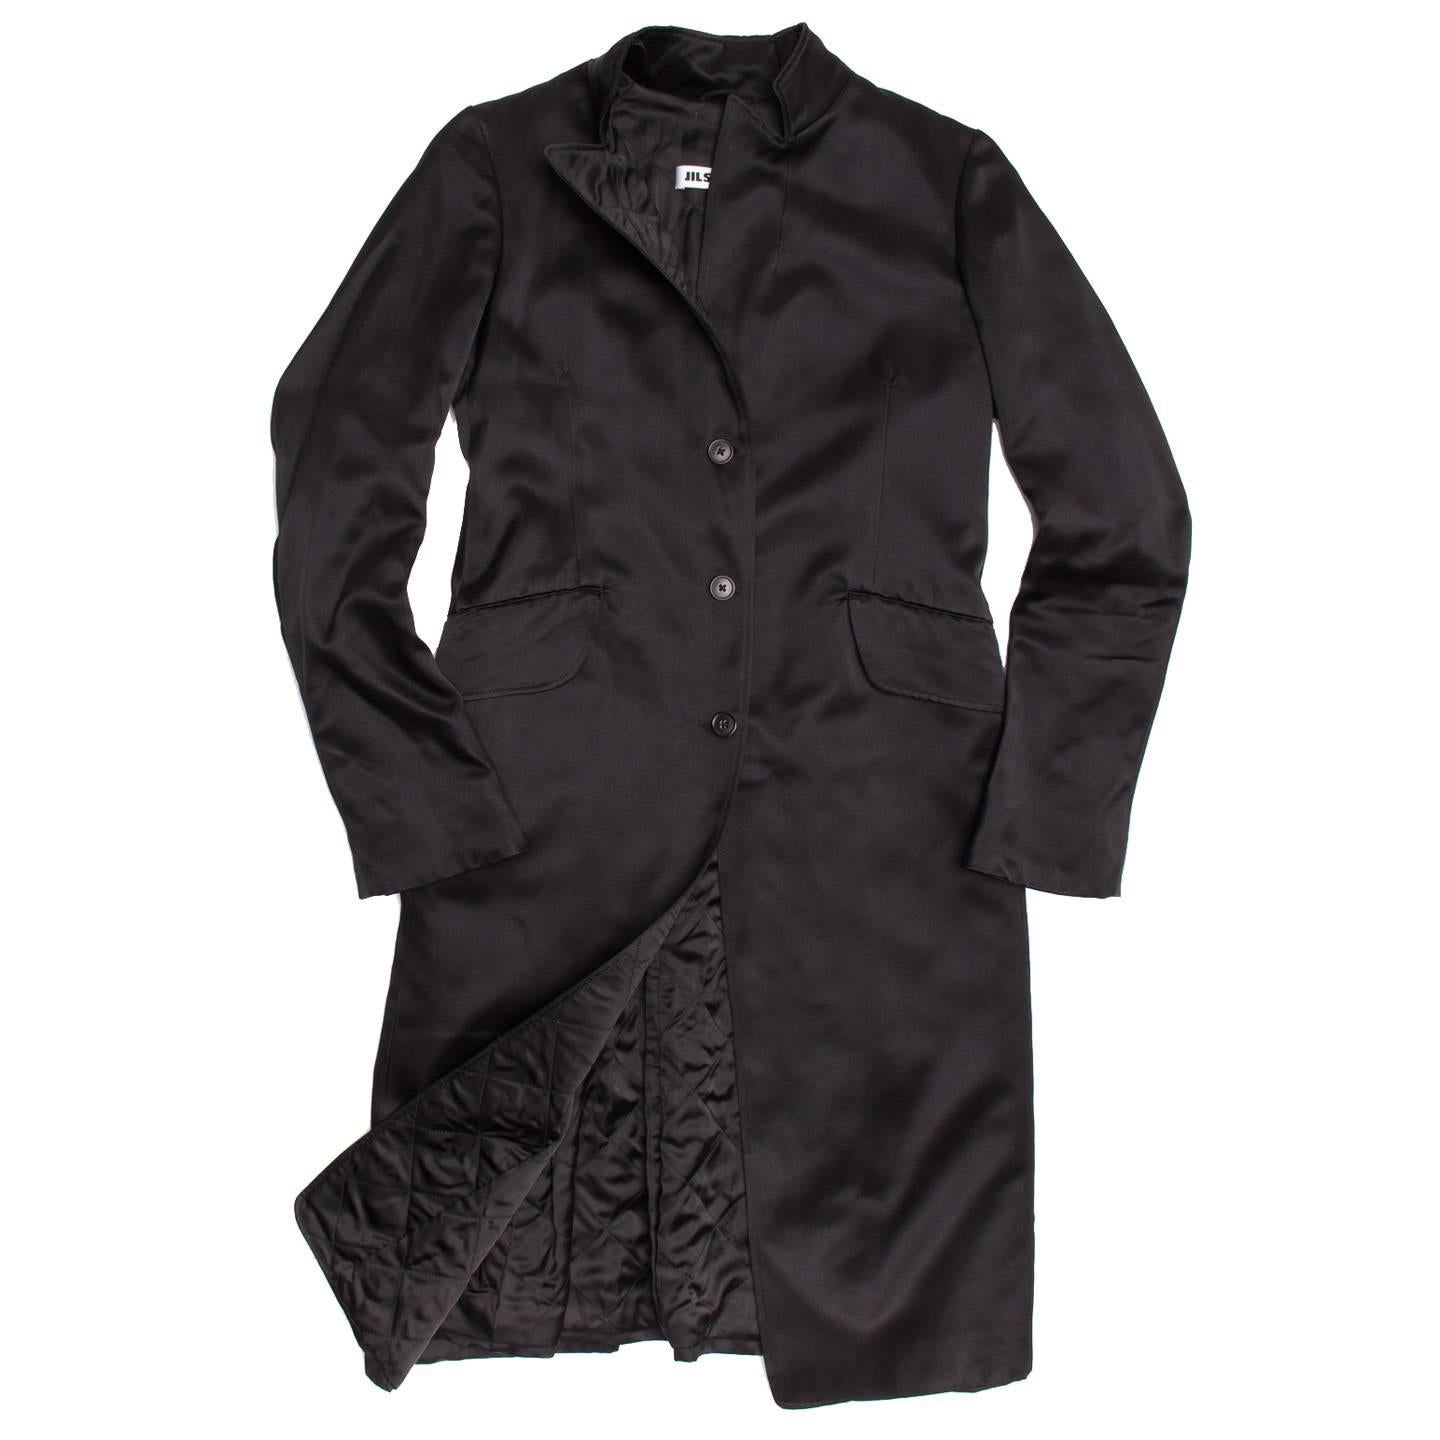 Long black silk satin 3 buttoned evening coat. 2 wide flap pockets at front side. Seams at back have pleats which flare out for a nice feminine touch to a classic tailored coat. Diamond quilted lining.

Size  40 French sizing

Condition 